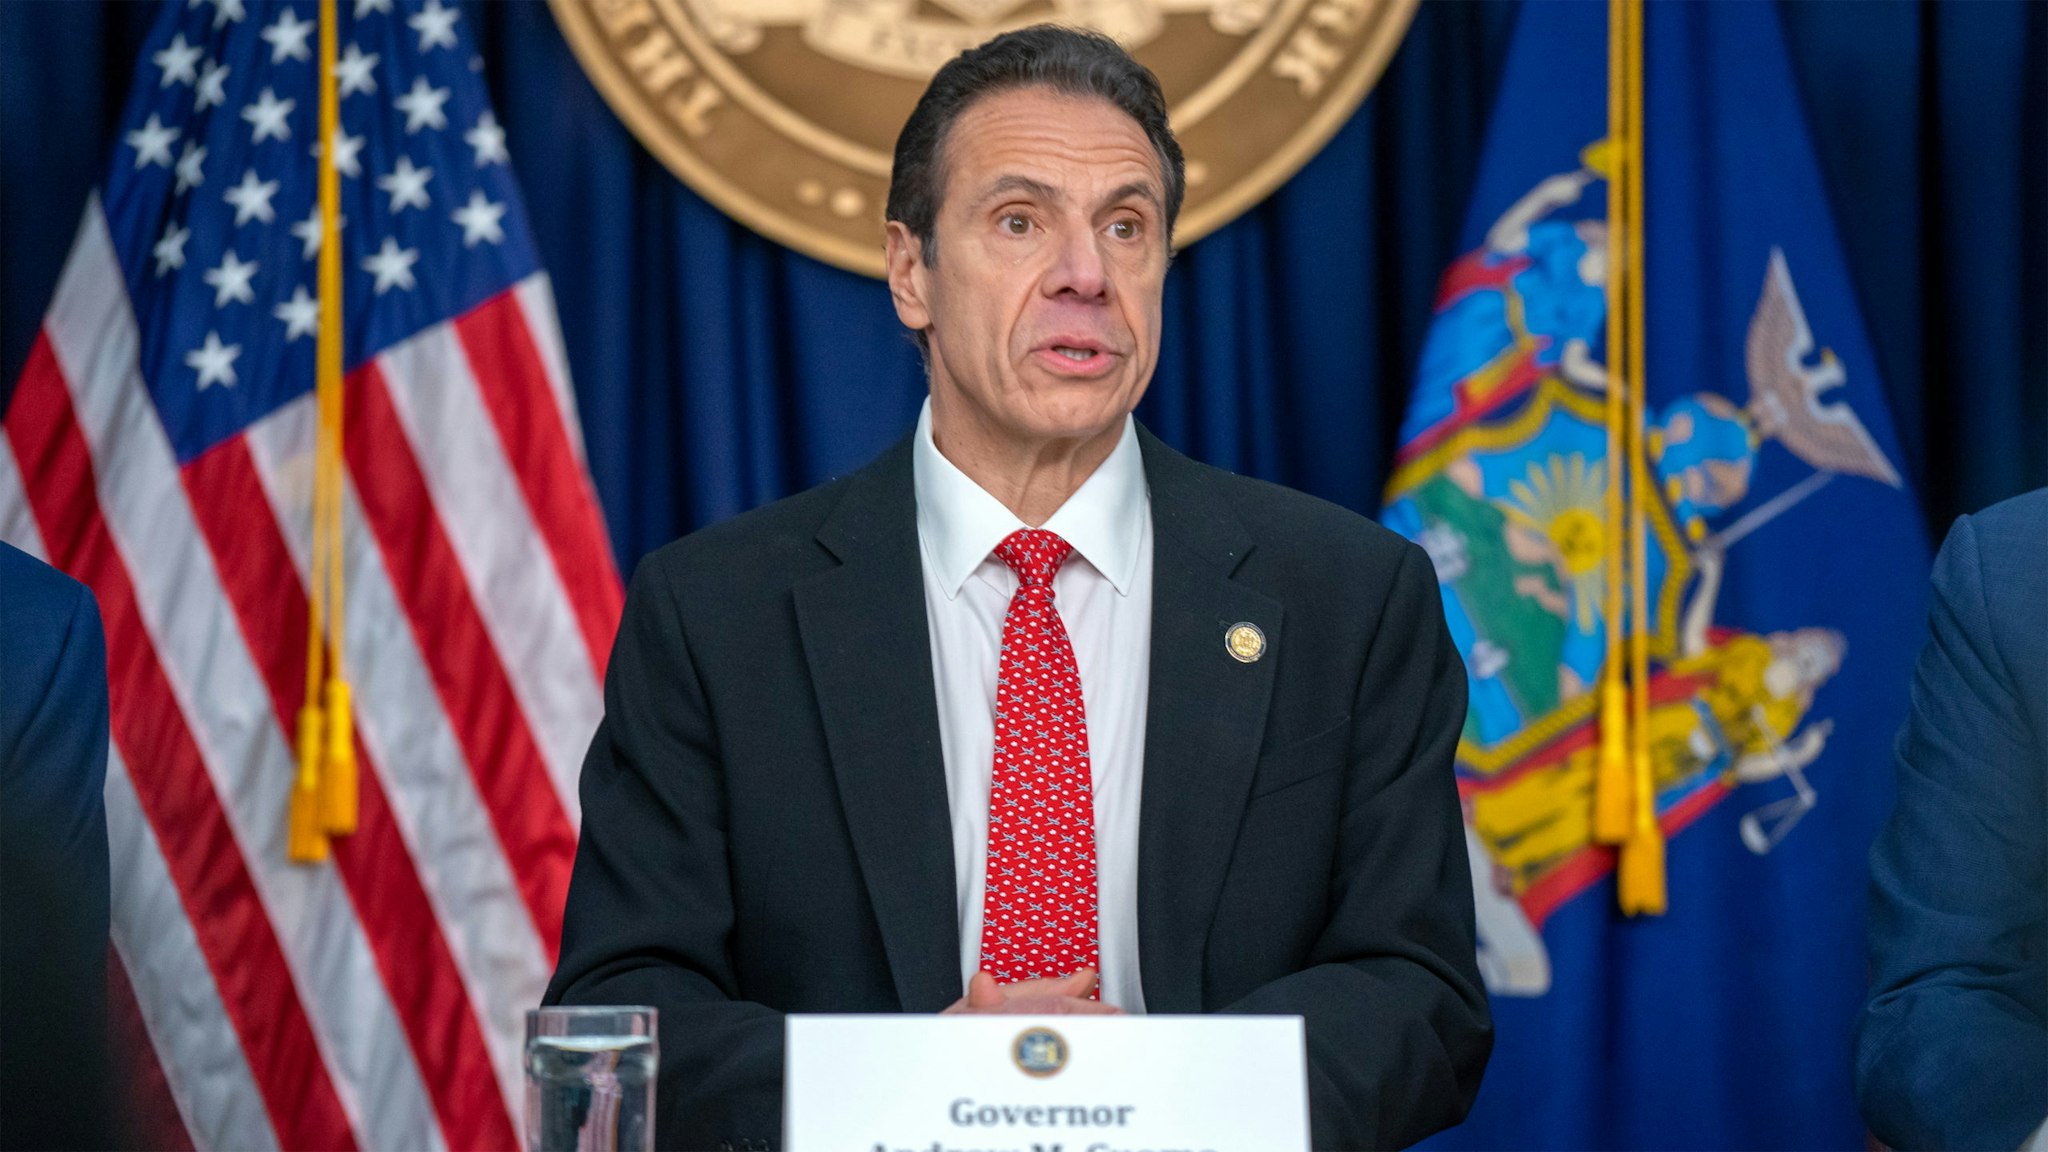 NEW YORK, NY - MARCH 2: New York state Gov. Andrew Cuomo speaks during a news conference on the first confirmed case of COVID-19 in New York on March 2, 2020 in New York City. A female health worker in her 30s who had traveled in Iran contracted the virus and is now isolated at home with symptoms of COVID-19, but is not in serious condition. Cuomo said in a statement that the patient "has been in a controlled situation since arriving to New York."